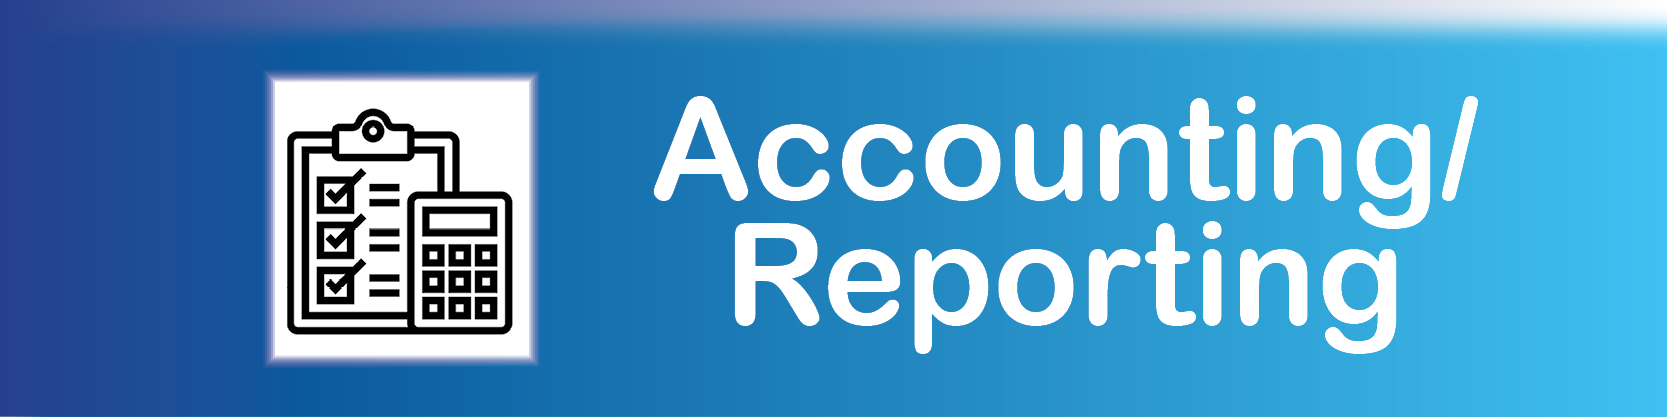 A clipboard and calculator icon with the words "Account/Reporting" 